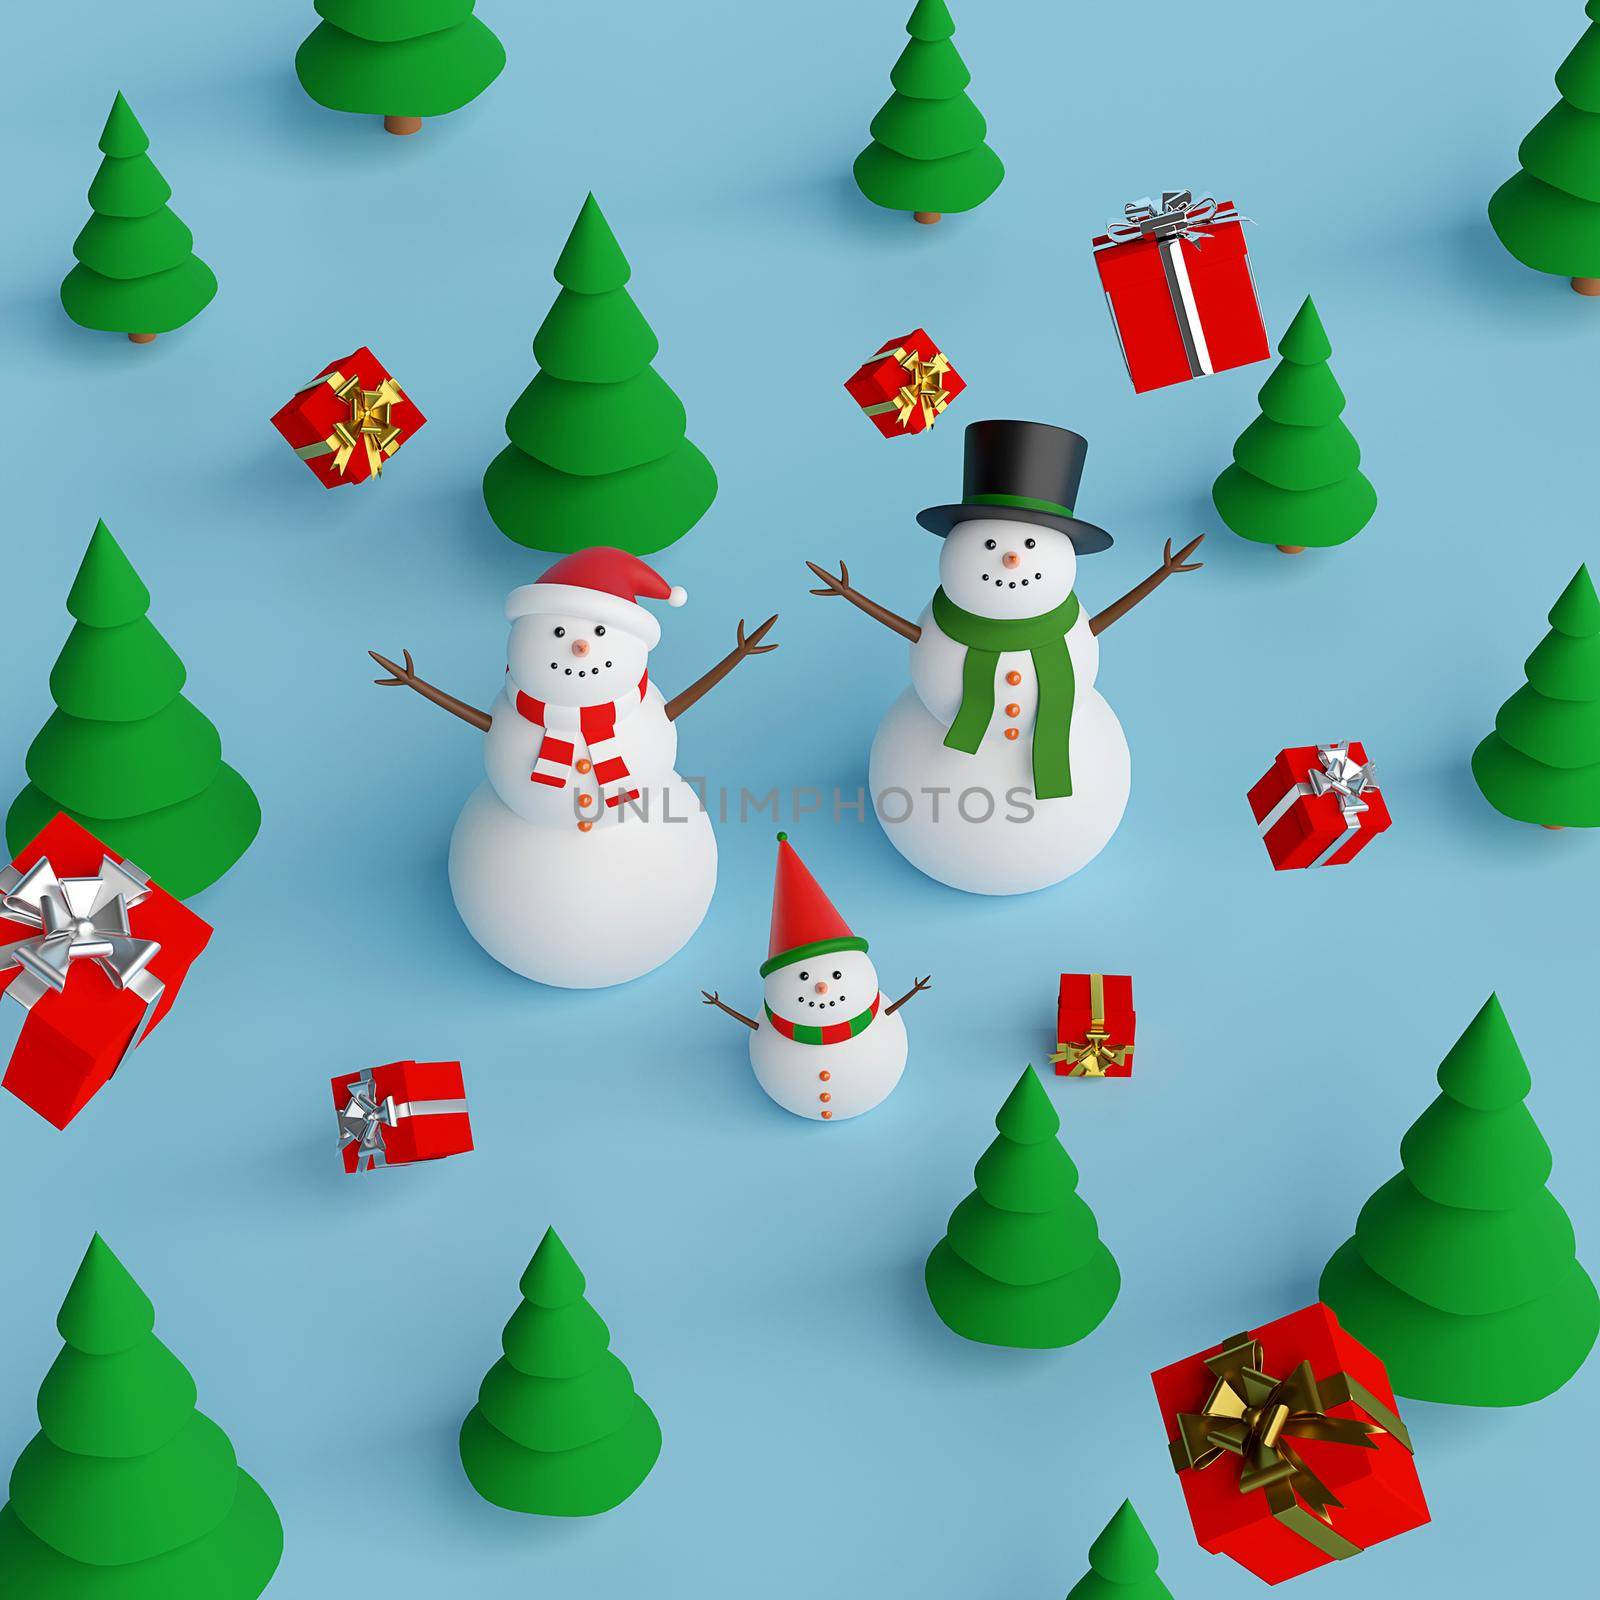 Merry Christmas and Happy New Year, Snowman in pine forest with Christmas gifts, 3d rendering by nutzchotwarut